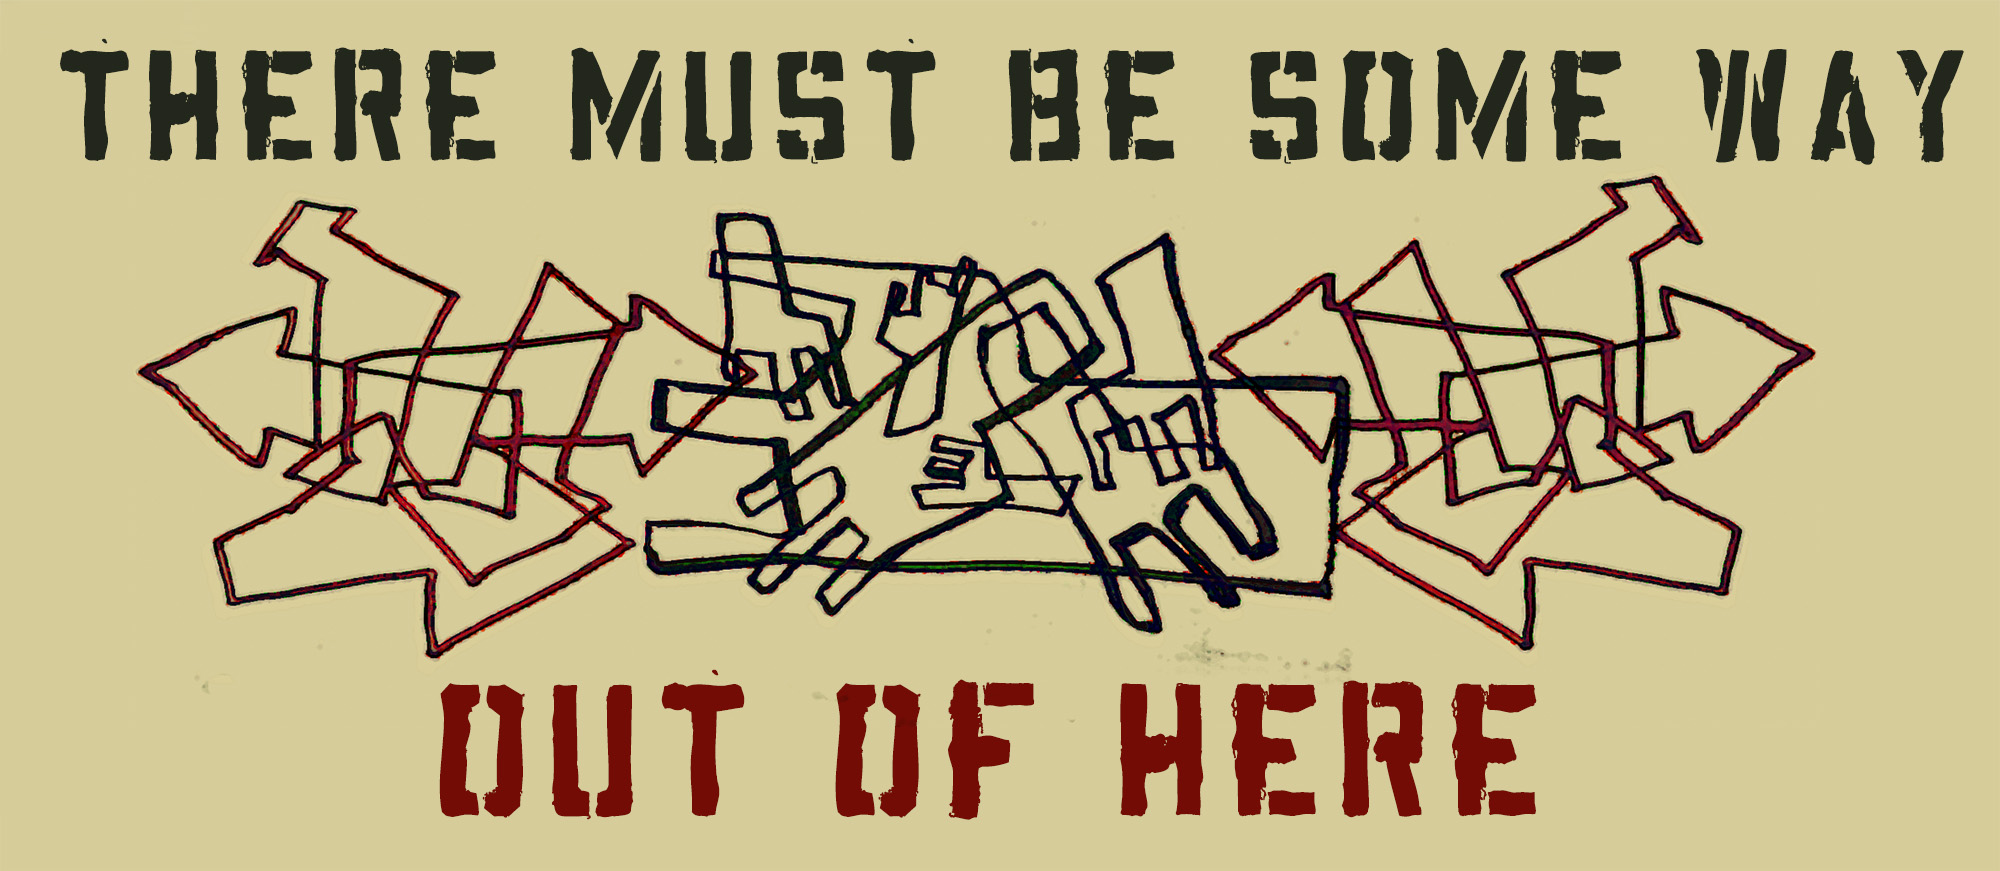 THEREMUSTBESOMEWAYOUTOFHERE GRAPHIC